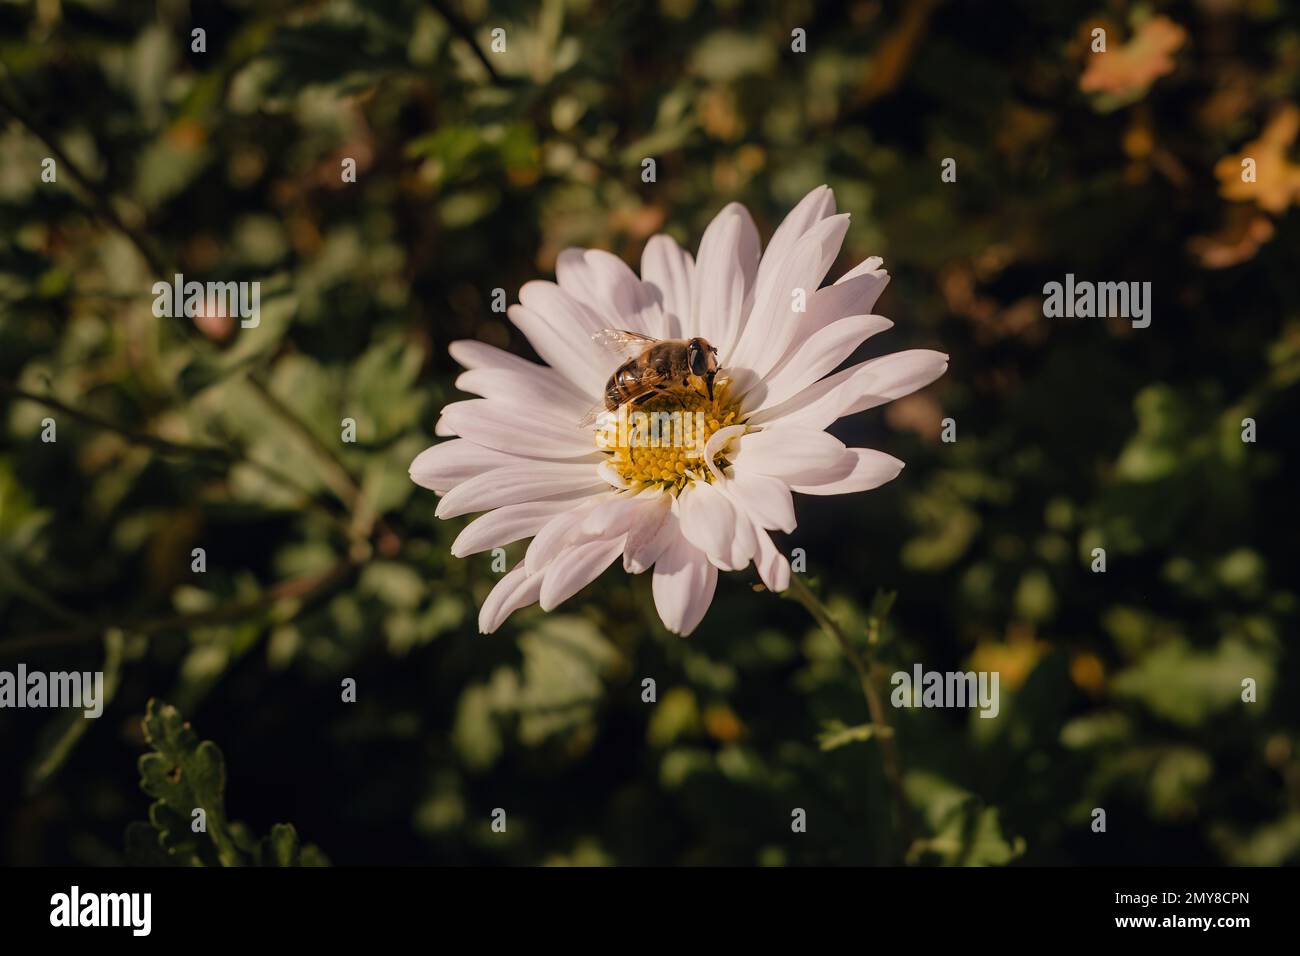 Close-up view of honey bee on daisy flower in garden. Insect collecting pollen. High quality photo Stock Photo